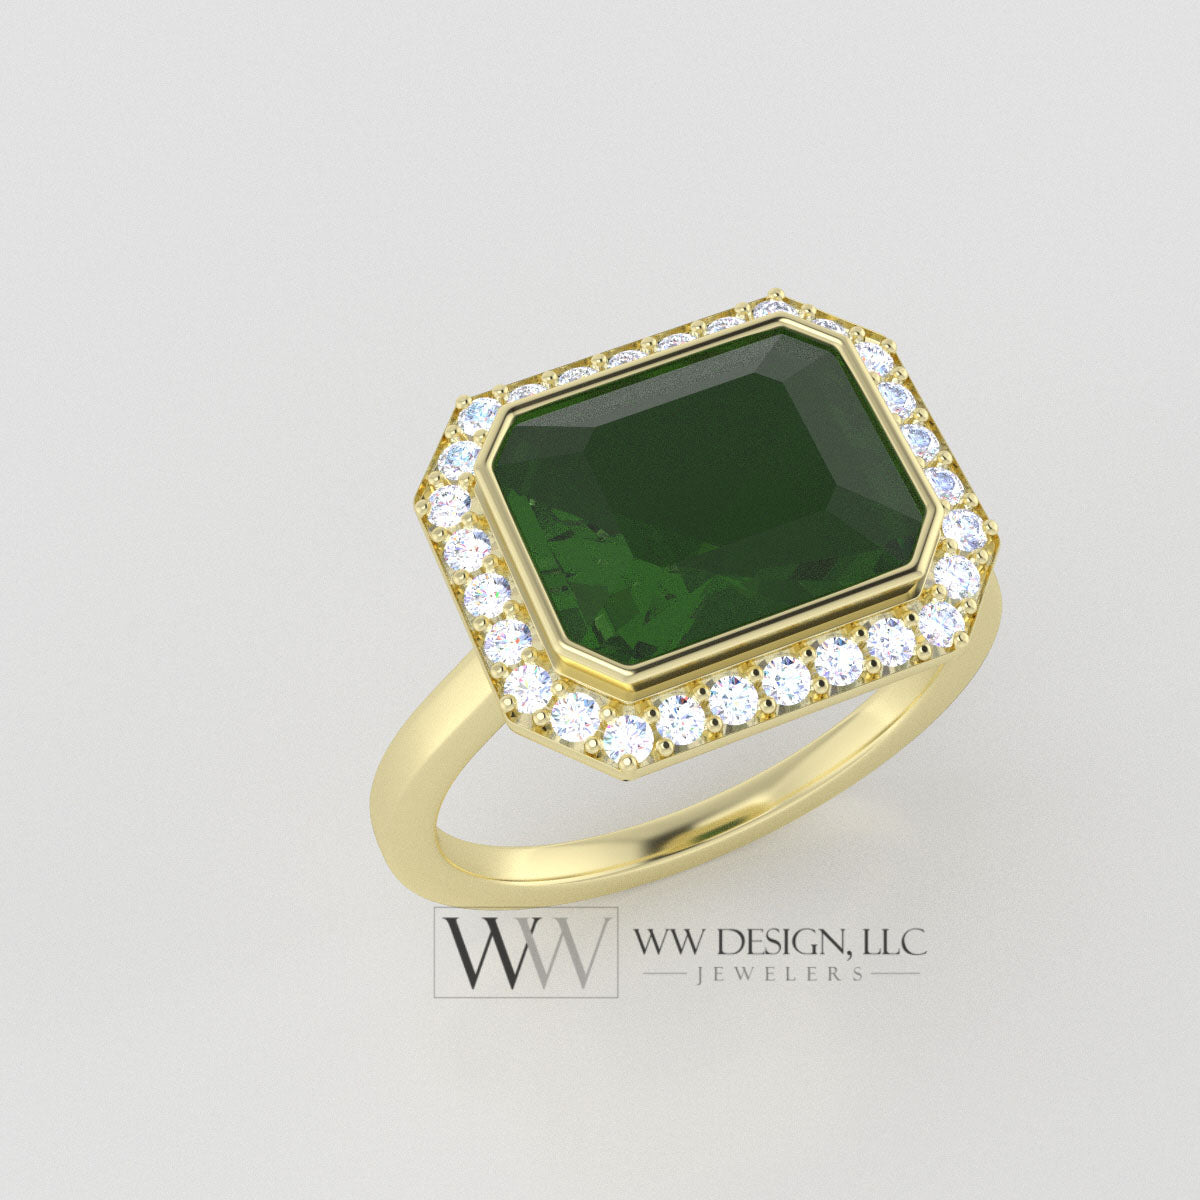 Green Tourmaline 3.3ct East West Emerald Shaped Ring with 0.28ctw Diamond Halo - 14k 18k Gold (Y, R,W) Platinum